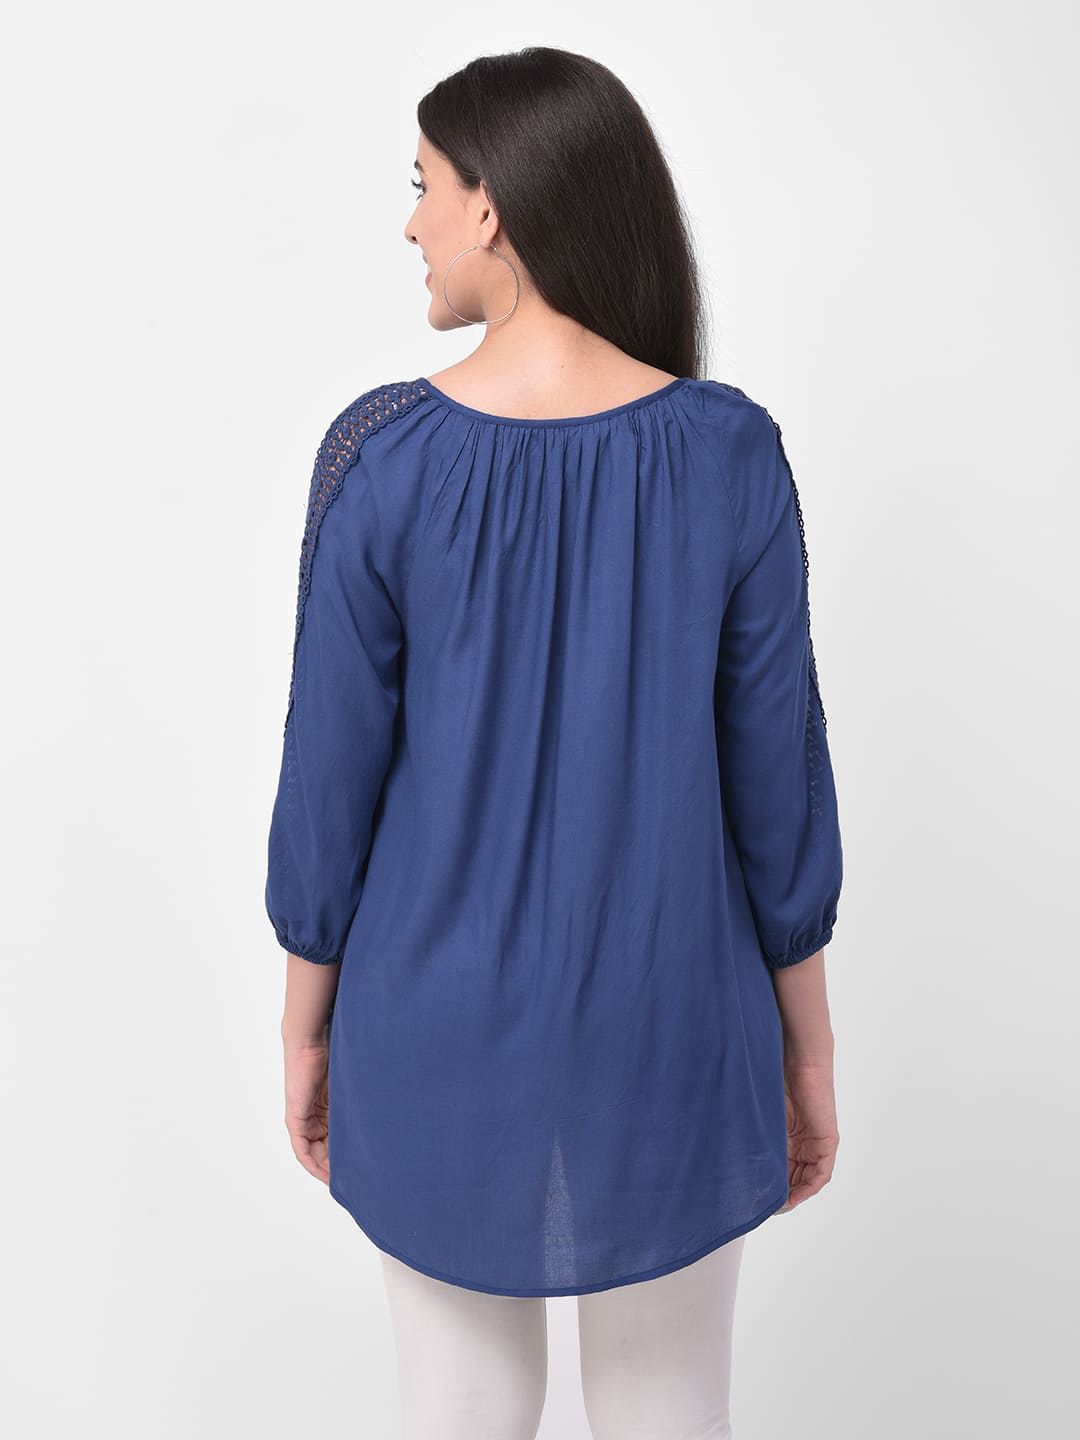 Round-Neck Top with Lace Accent